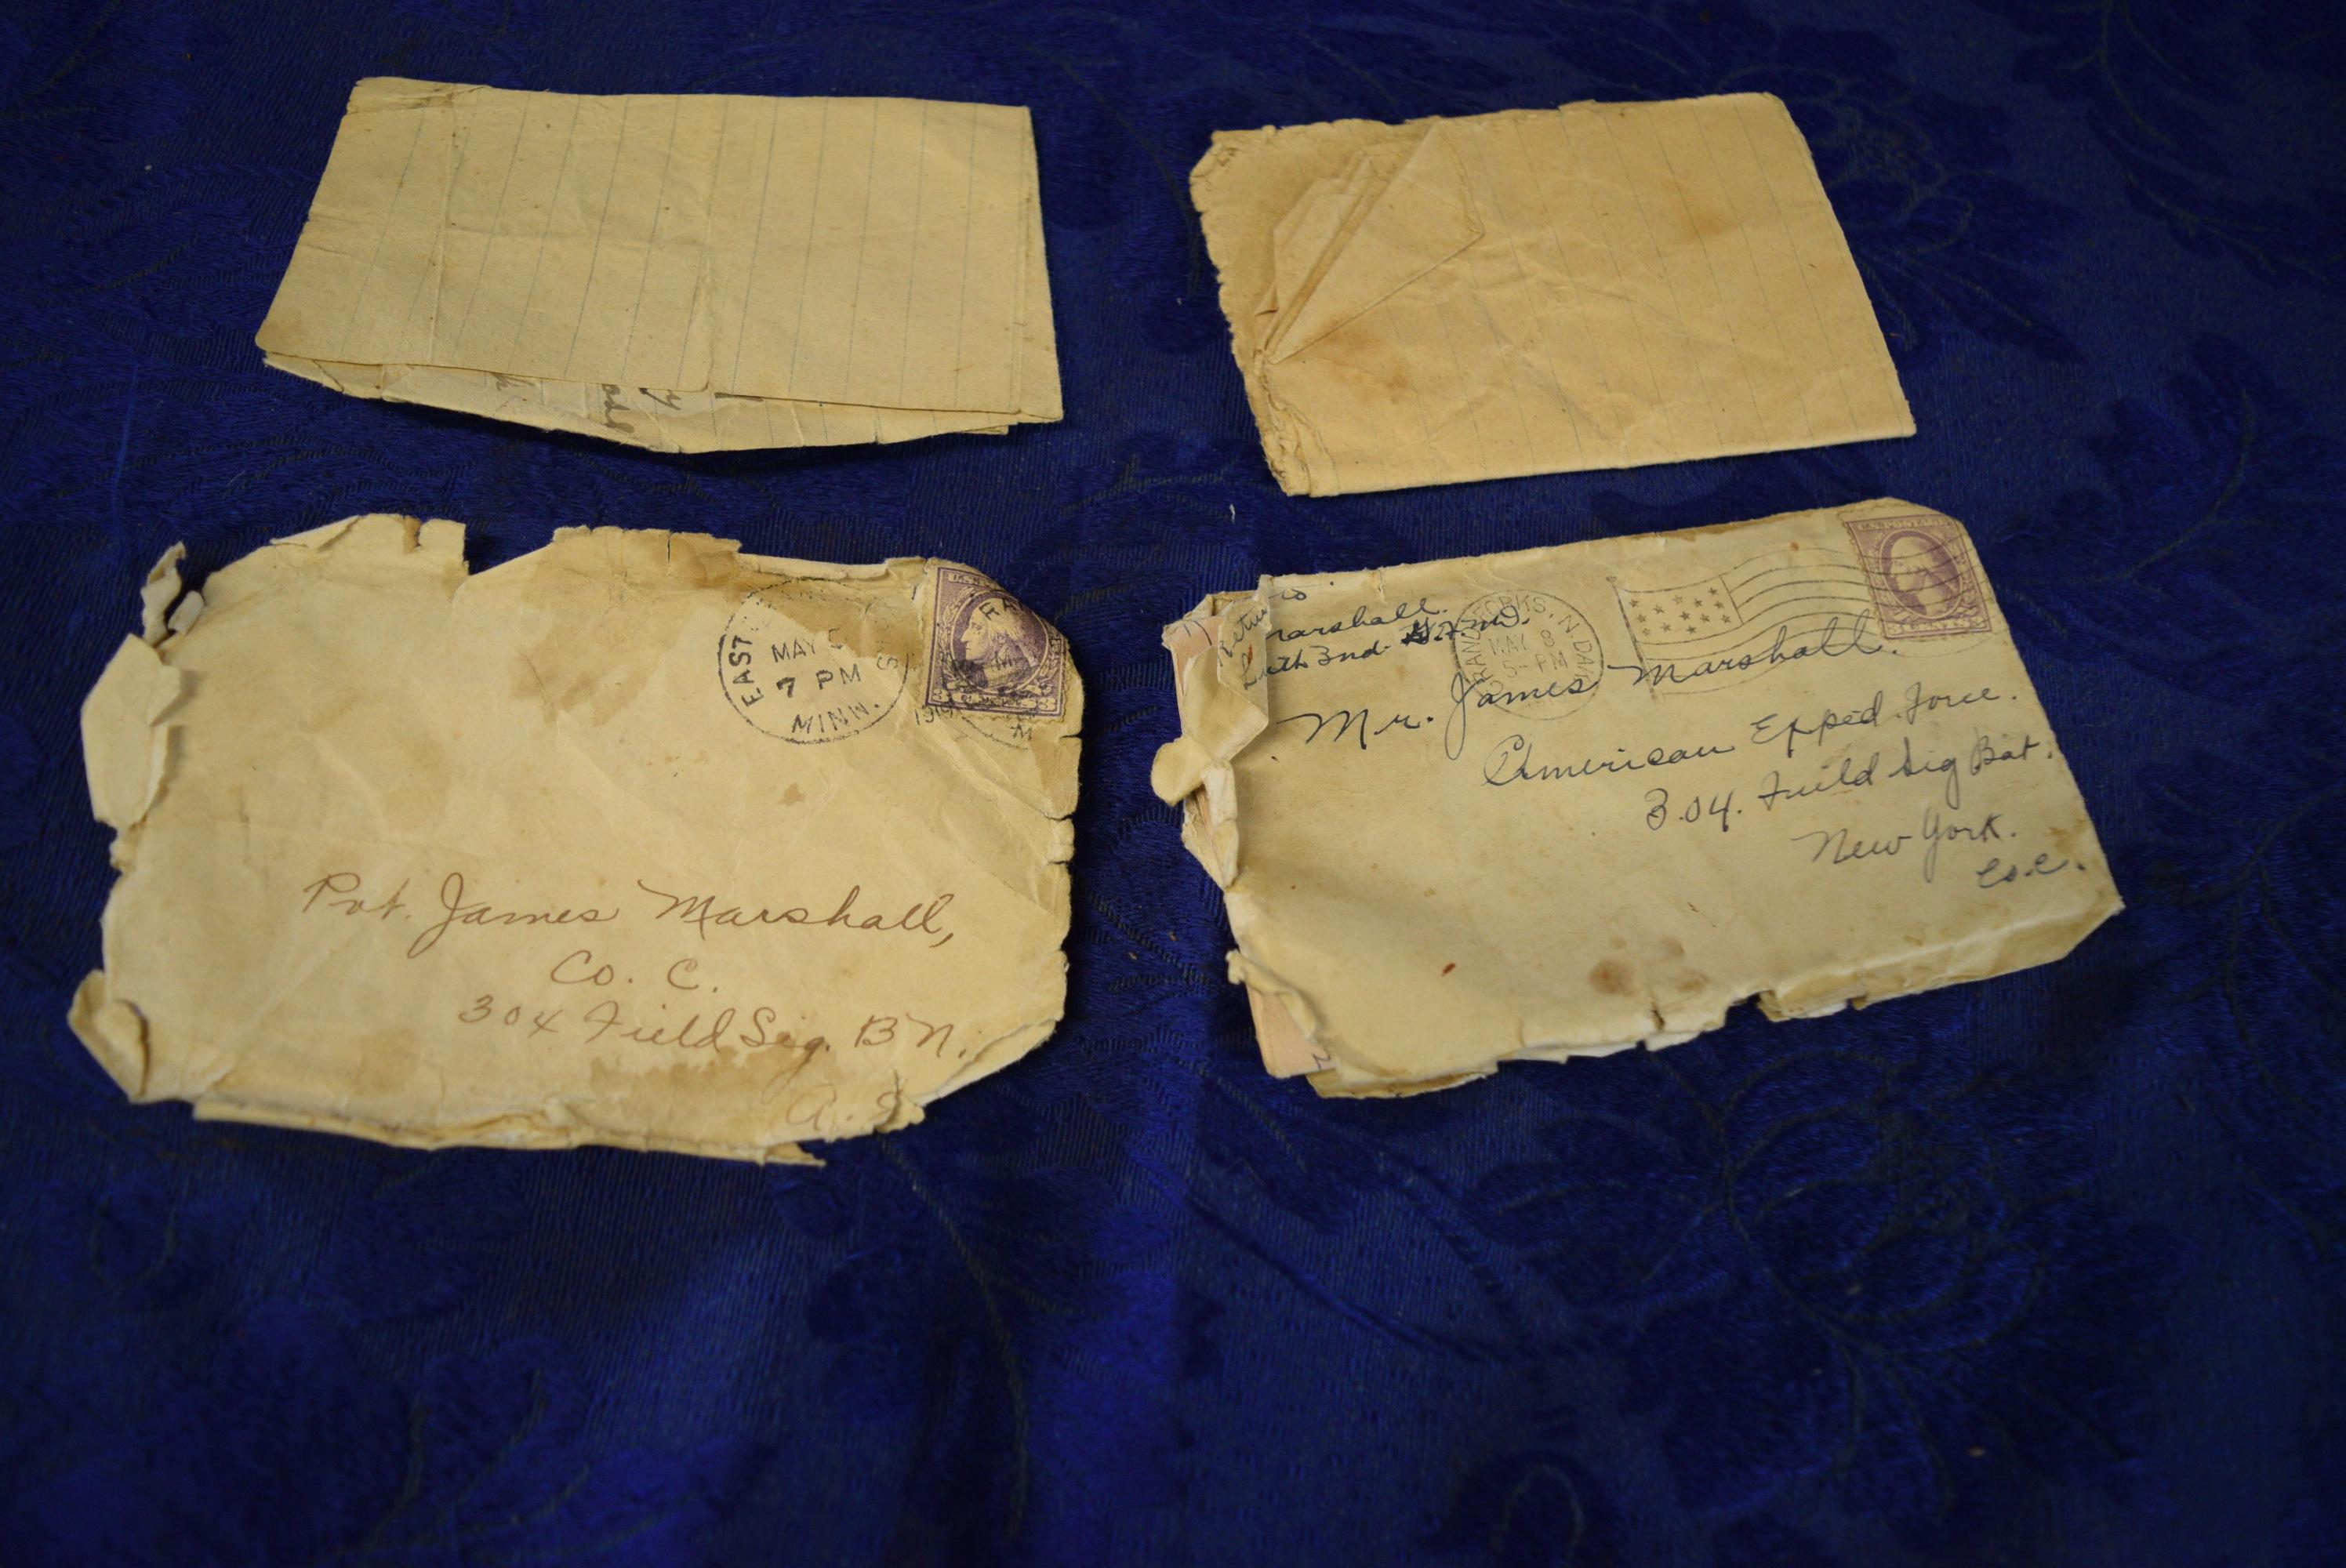 WWI SOLDIER LETTERS FROM HOME!